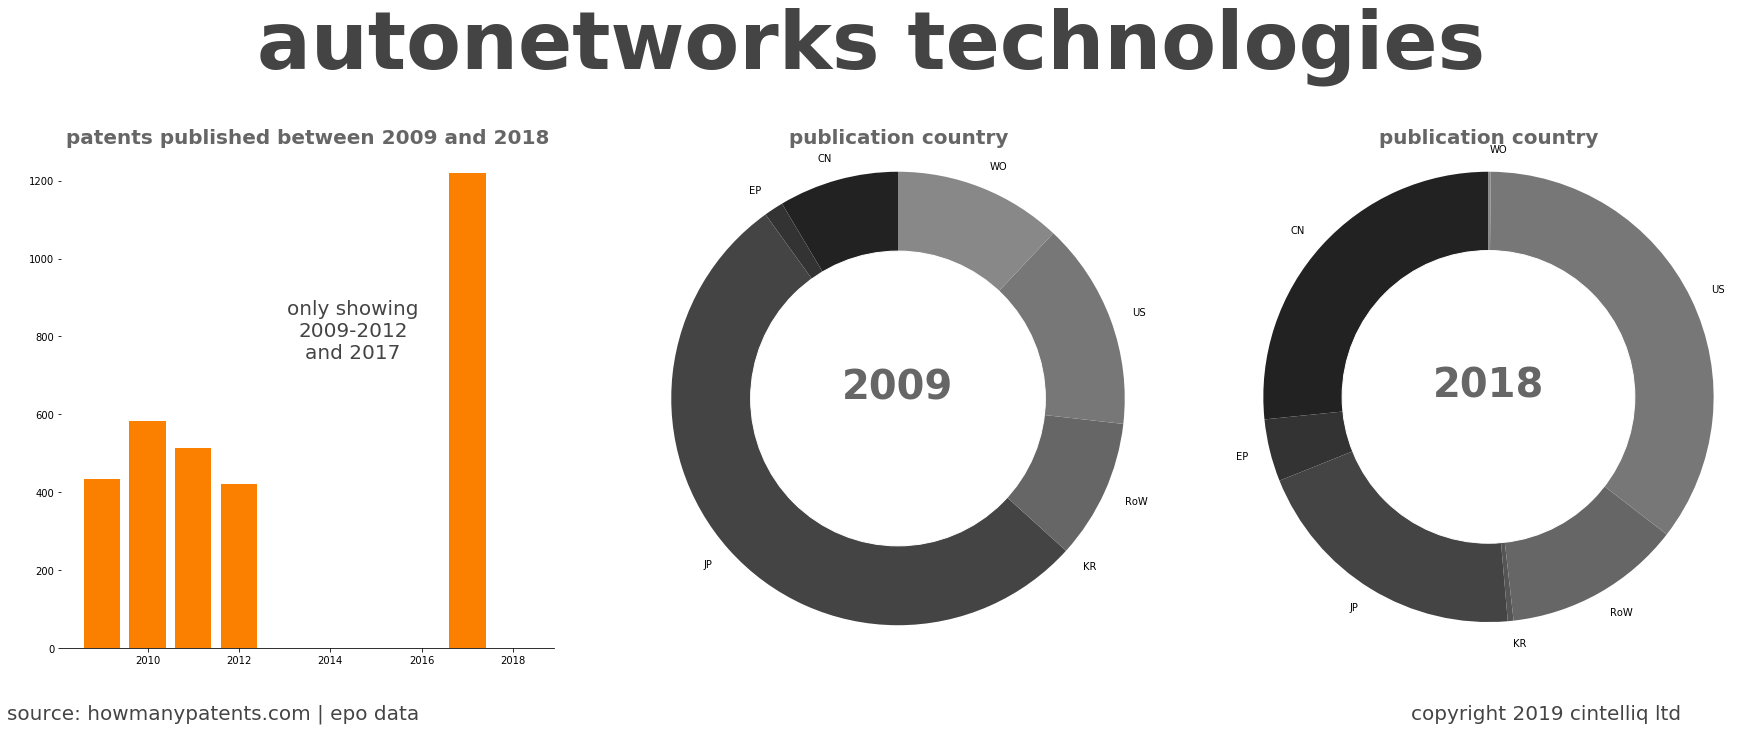 summary of patents for Autonetworks Technologies